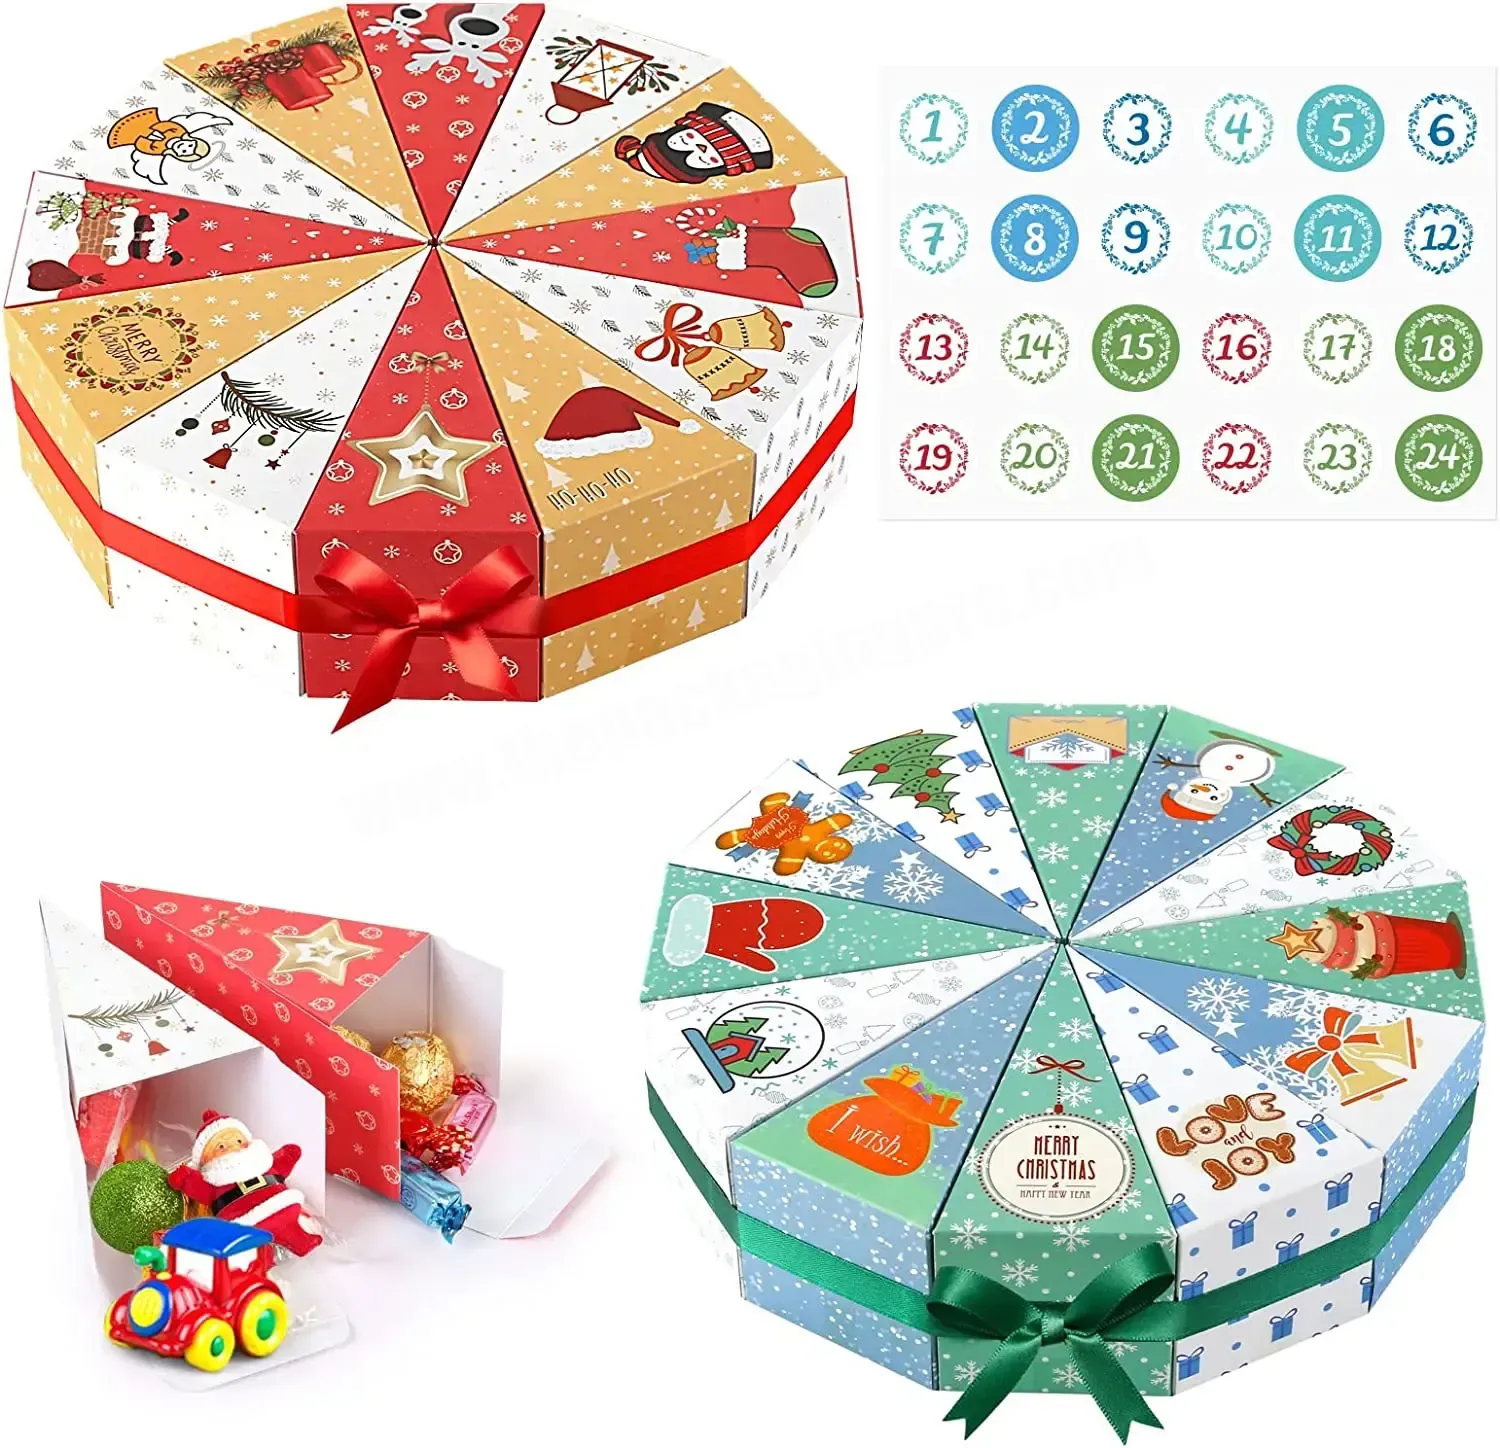 24 Days Paper Countdown Family Christmas Chocolate Candy Advent Calendar Gift Boxes Children Kids Toy Advent Calendar Gift Box - Buy Children Toy Advent Calendar Gift Box,Family Christmas Advent Calendar Box,Chocolate Advent Calendar Box.